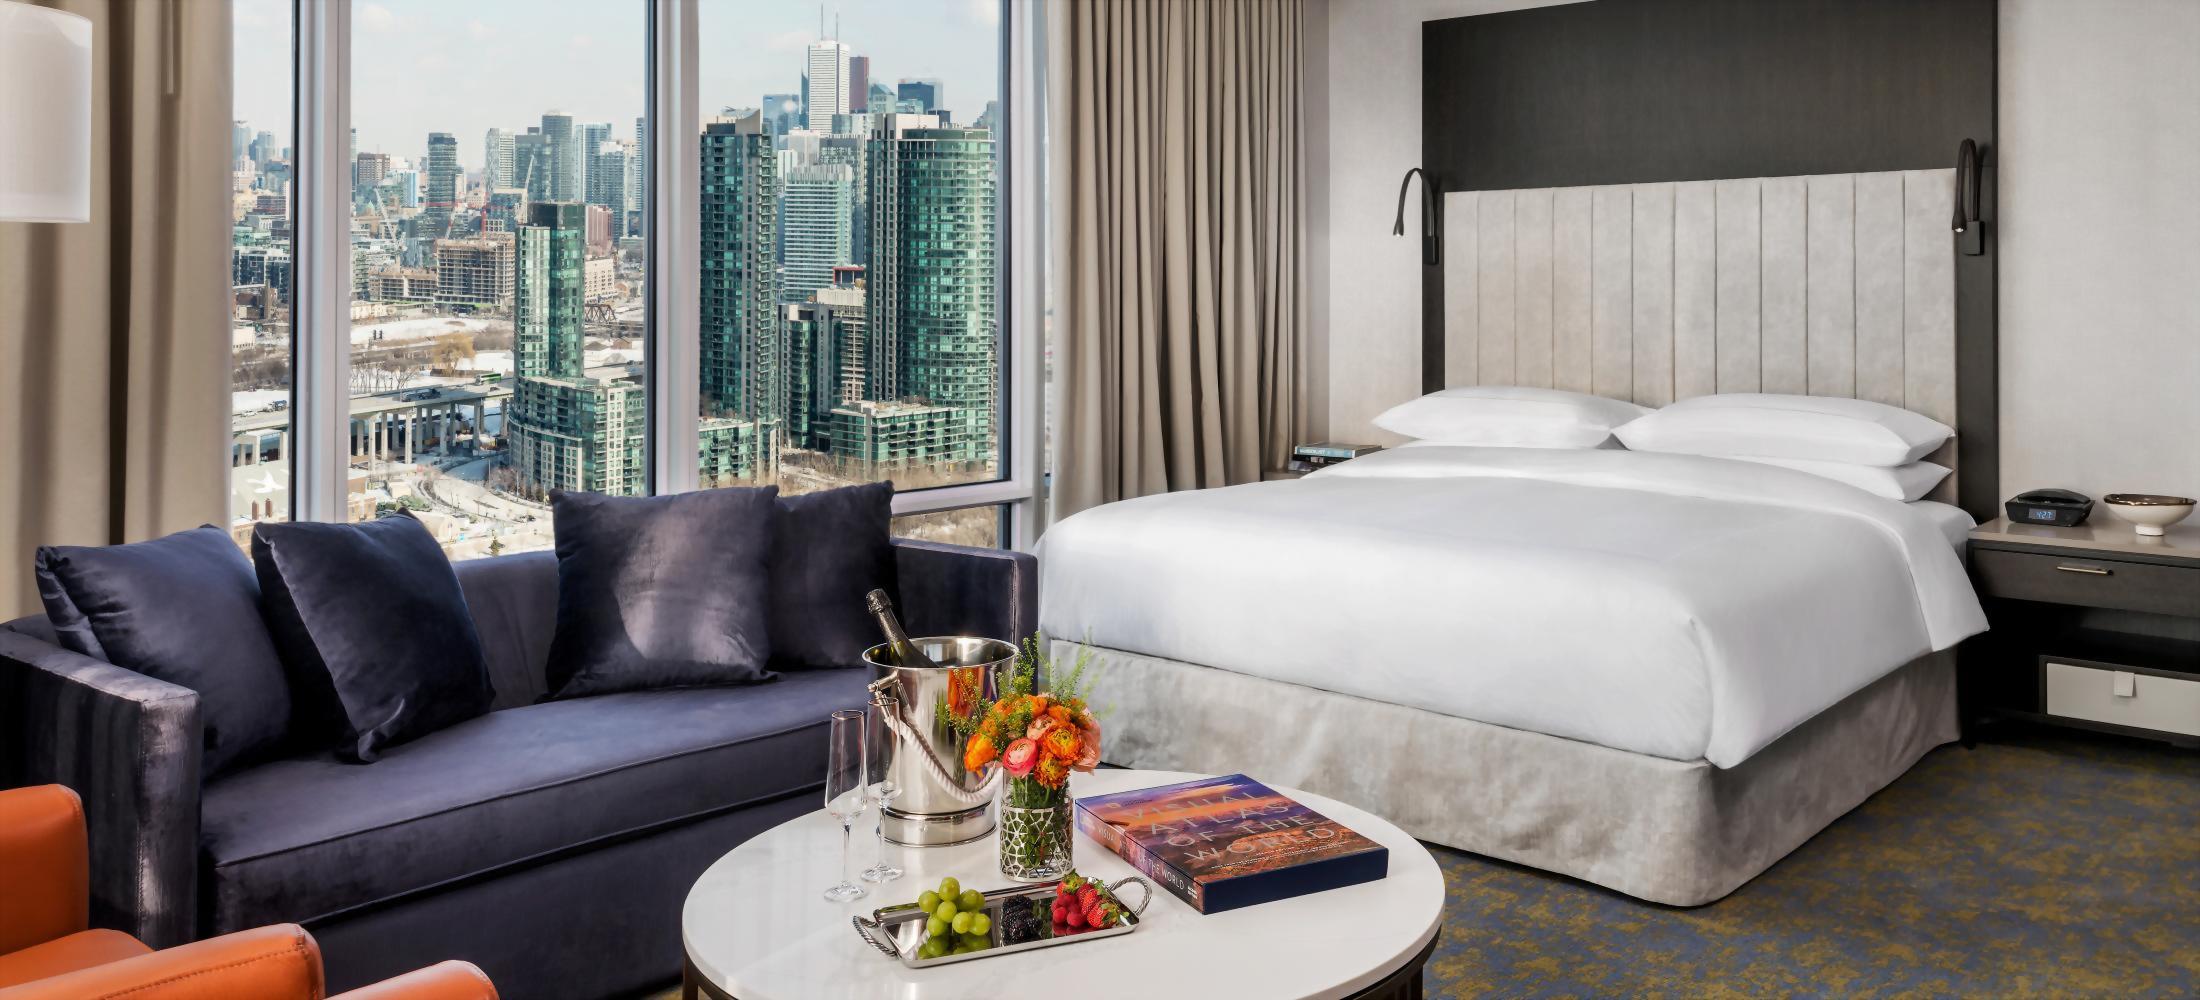 Experience a new kind of hospitality at Hotel X Toronto, the latest and most luxurious urban resort in Downtown Toronto.